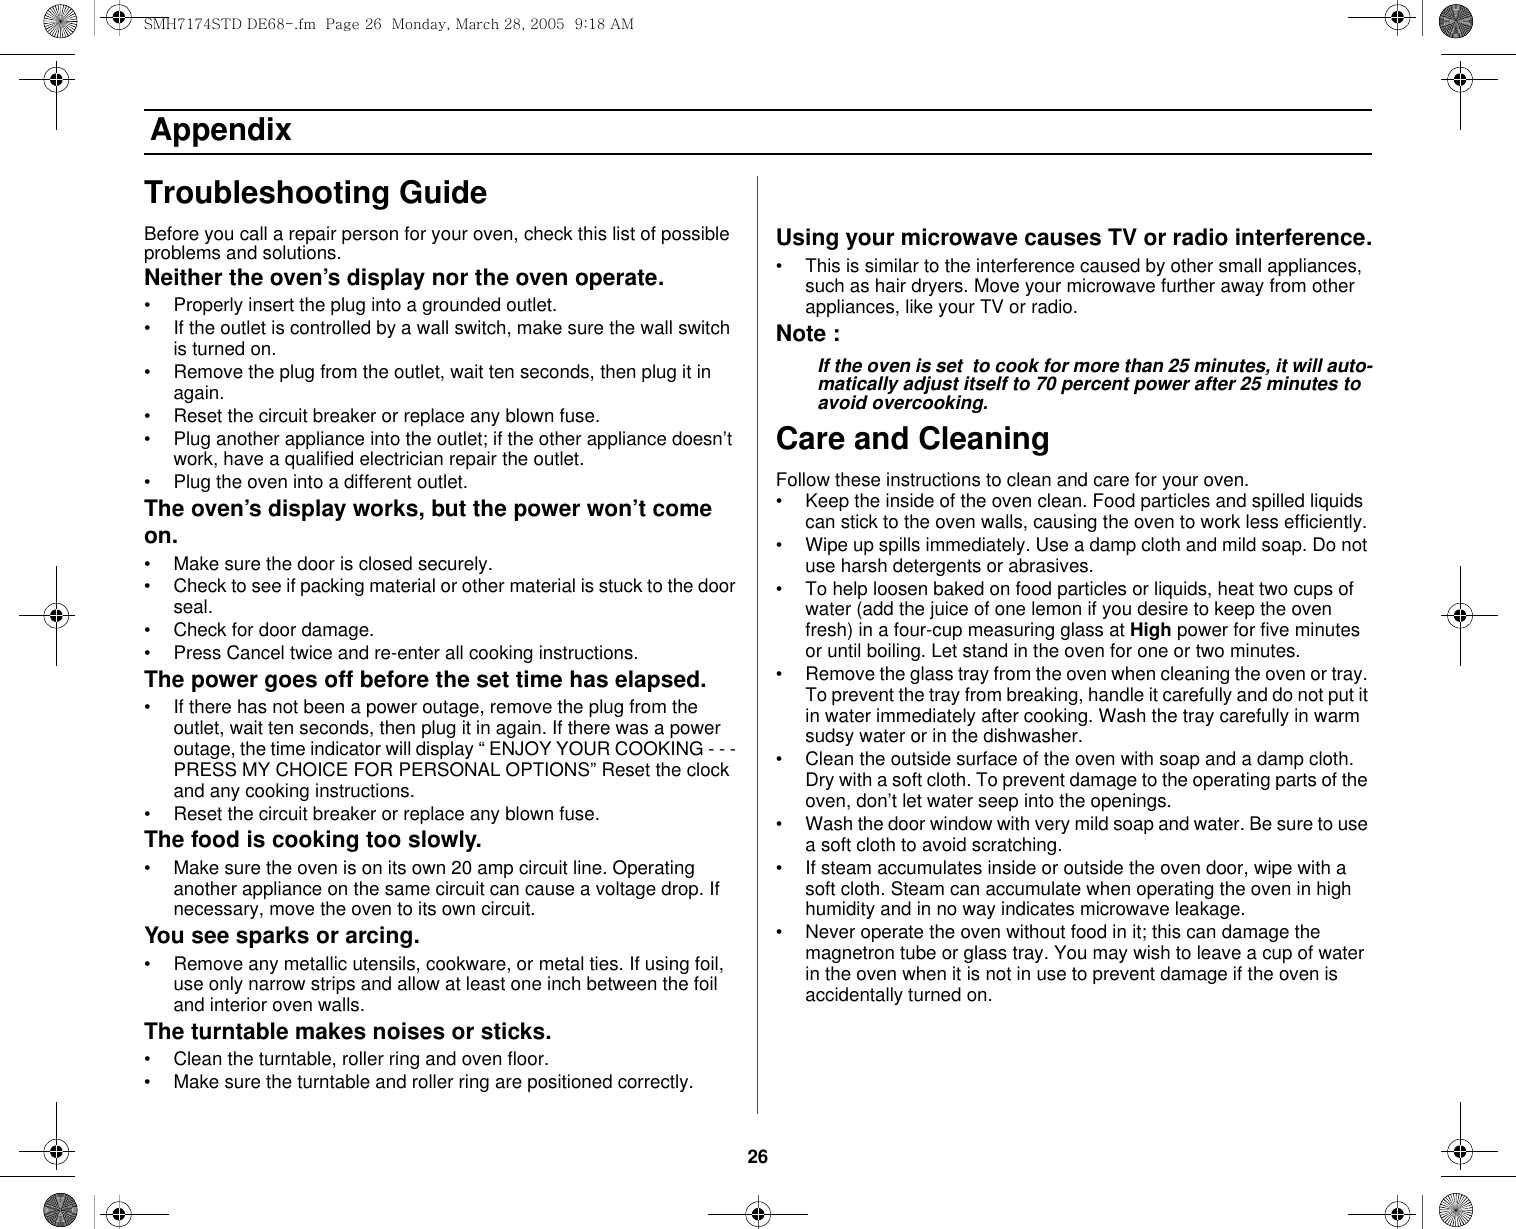 26 AppendixTroubleshooting GuideBefore you call a repair person for your oven, check this list of possible problems and solutions.Neither the oven’s display nor the oven operate.• Properly insert the plug into a grounded outlet. • If the outlet is controlled by a wall switch, make sure the wall switch is turned on. • Remove the plug from the outlet, wait ten seconds, then plug it in again. • Reset the circuit breaker or replace any blown fuse.• Plug another appliance into the outlet; if the other appliance doesn’t work, have a qualified electrician repair the outlet. • Plug the oven into a different outlet.The oven’s display works, but the power won’t come on.• Make sure the door is closed securely.• Check to see if packing material or other material is stuck to the door seal. • Check for door damage.• Press Cancel twice and re-enter all cooking instructions.The power goes off before the set time has elapsed.• If there has not been a power outage, remove the plug from the outlet, wait ten seconds, then plug it in again. If there was a power outage, the time indicator will display “ ENJOY YOUR COOKING - - - PRESS MY CHOICE FOR PERSONAL OPTIONS” Reset the clock and any cooking instructions. • Reset the circuit breaker or replace any blown fuse. The food is cooking too slowly.• Make sure the oven is on its own 20 amp circuit line. Operating another appliance on the same circuit can cause a voltage drop. If necessary, move the oven to its own circuit.You see sparks or arcing.• Remove any metallic utensils, cookware, or metal ties. If using foil, use only narrow strips and allow at least one inch between the foil and interior oven walls.The turntable makes noises or sticks.• Clean the turntable, roller ring and oven floor. • Make sure the turntable and roller ring are positioned correctly.Using your microwave causes TV or radio interference.• This is similar to the interference caused by other small appliances, such as hair dryers. Move your microwave further away from other appliances, like your TV or radio.Note :If the oven is set  to cook for more than 25 minutes, it will auto-matically adjust itself to 70 percent power after 25 minutes to avoid overcooking.Care and CleaningFollow these instructions to clean and care for your oven.• Keep the inside of the oven clean. Food particles and spilled liquids can stick to the oven walls, causing the oven to work less efficiently.• Wipe up spills immediately. Use a damp cloth and mild soap. Do not use harsh detergents or abrasives. • To help loosen baked on food particles or liquids, heat two cups of water (add the juice of one lemon if you desire to keep the oven fresh) in a four-cup measuring glass at High power for five minutes or until boiling. Let stand in the oven for one or two minutes. • Remove the glass tray from the oven when cleaning the oven or tray. To prevent the tray from breaking, handle it carefully and do not put it in water immediately after cooking. Wash the tray carefully in warm sudsy water or in the dishwasher. • Clean the outside surface of the oven with soap and a damp cloth. Dry with a soft cloth. To prevent damage to the operating parts of the oven, don’t let water seep into the openings.• Wash the door window with very mild soap and water. Be sure to use a soft cloth to avoid scratching.• If steam accumulates inside or outside the oven door, wipe with a soft cloth. Steam can accumulate when operating the oven in high humidity and in no way indicates microwave leakage.• Never operate the oven without food in it; this can damage the magnetron tube or glass tray. You may wish to leave a cup of water in the oven when it is not in use to prevent damage if the oven is accidentally turned on.SMH7174STD DE68-.fm  Page 26  Monday, March 28, 2005  9:18 AM